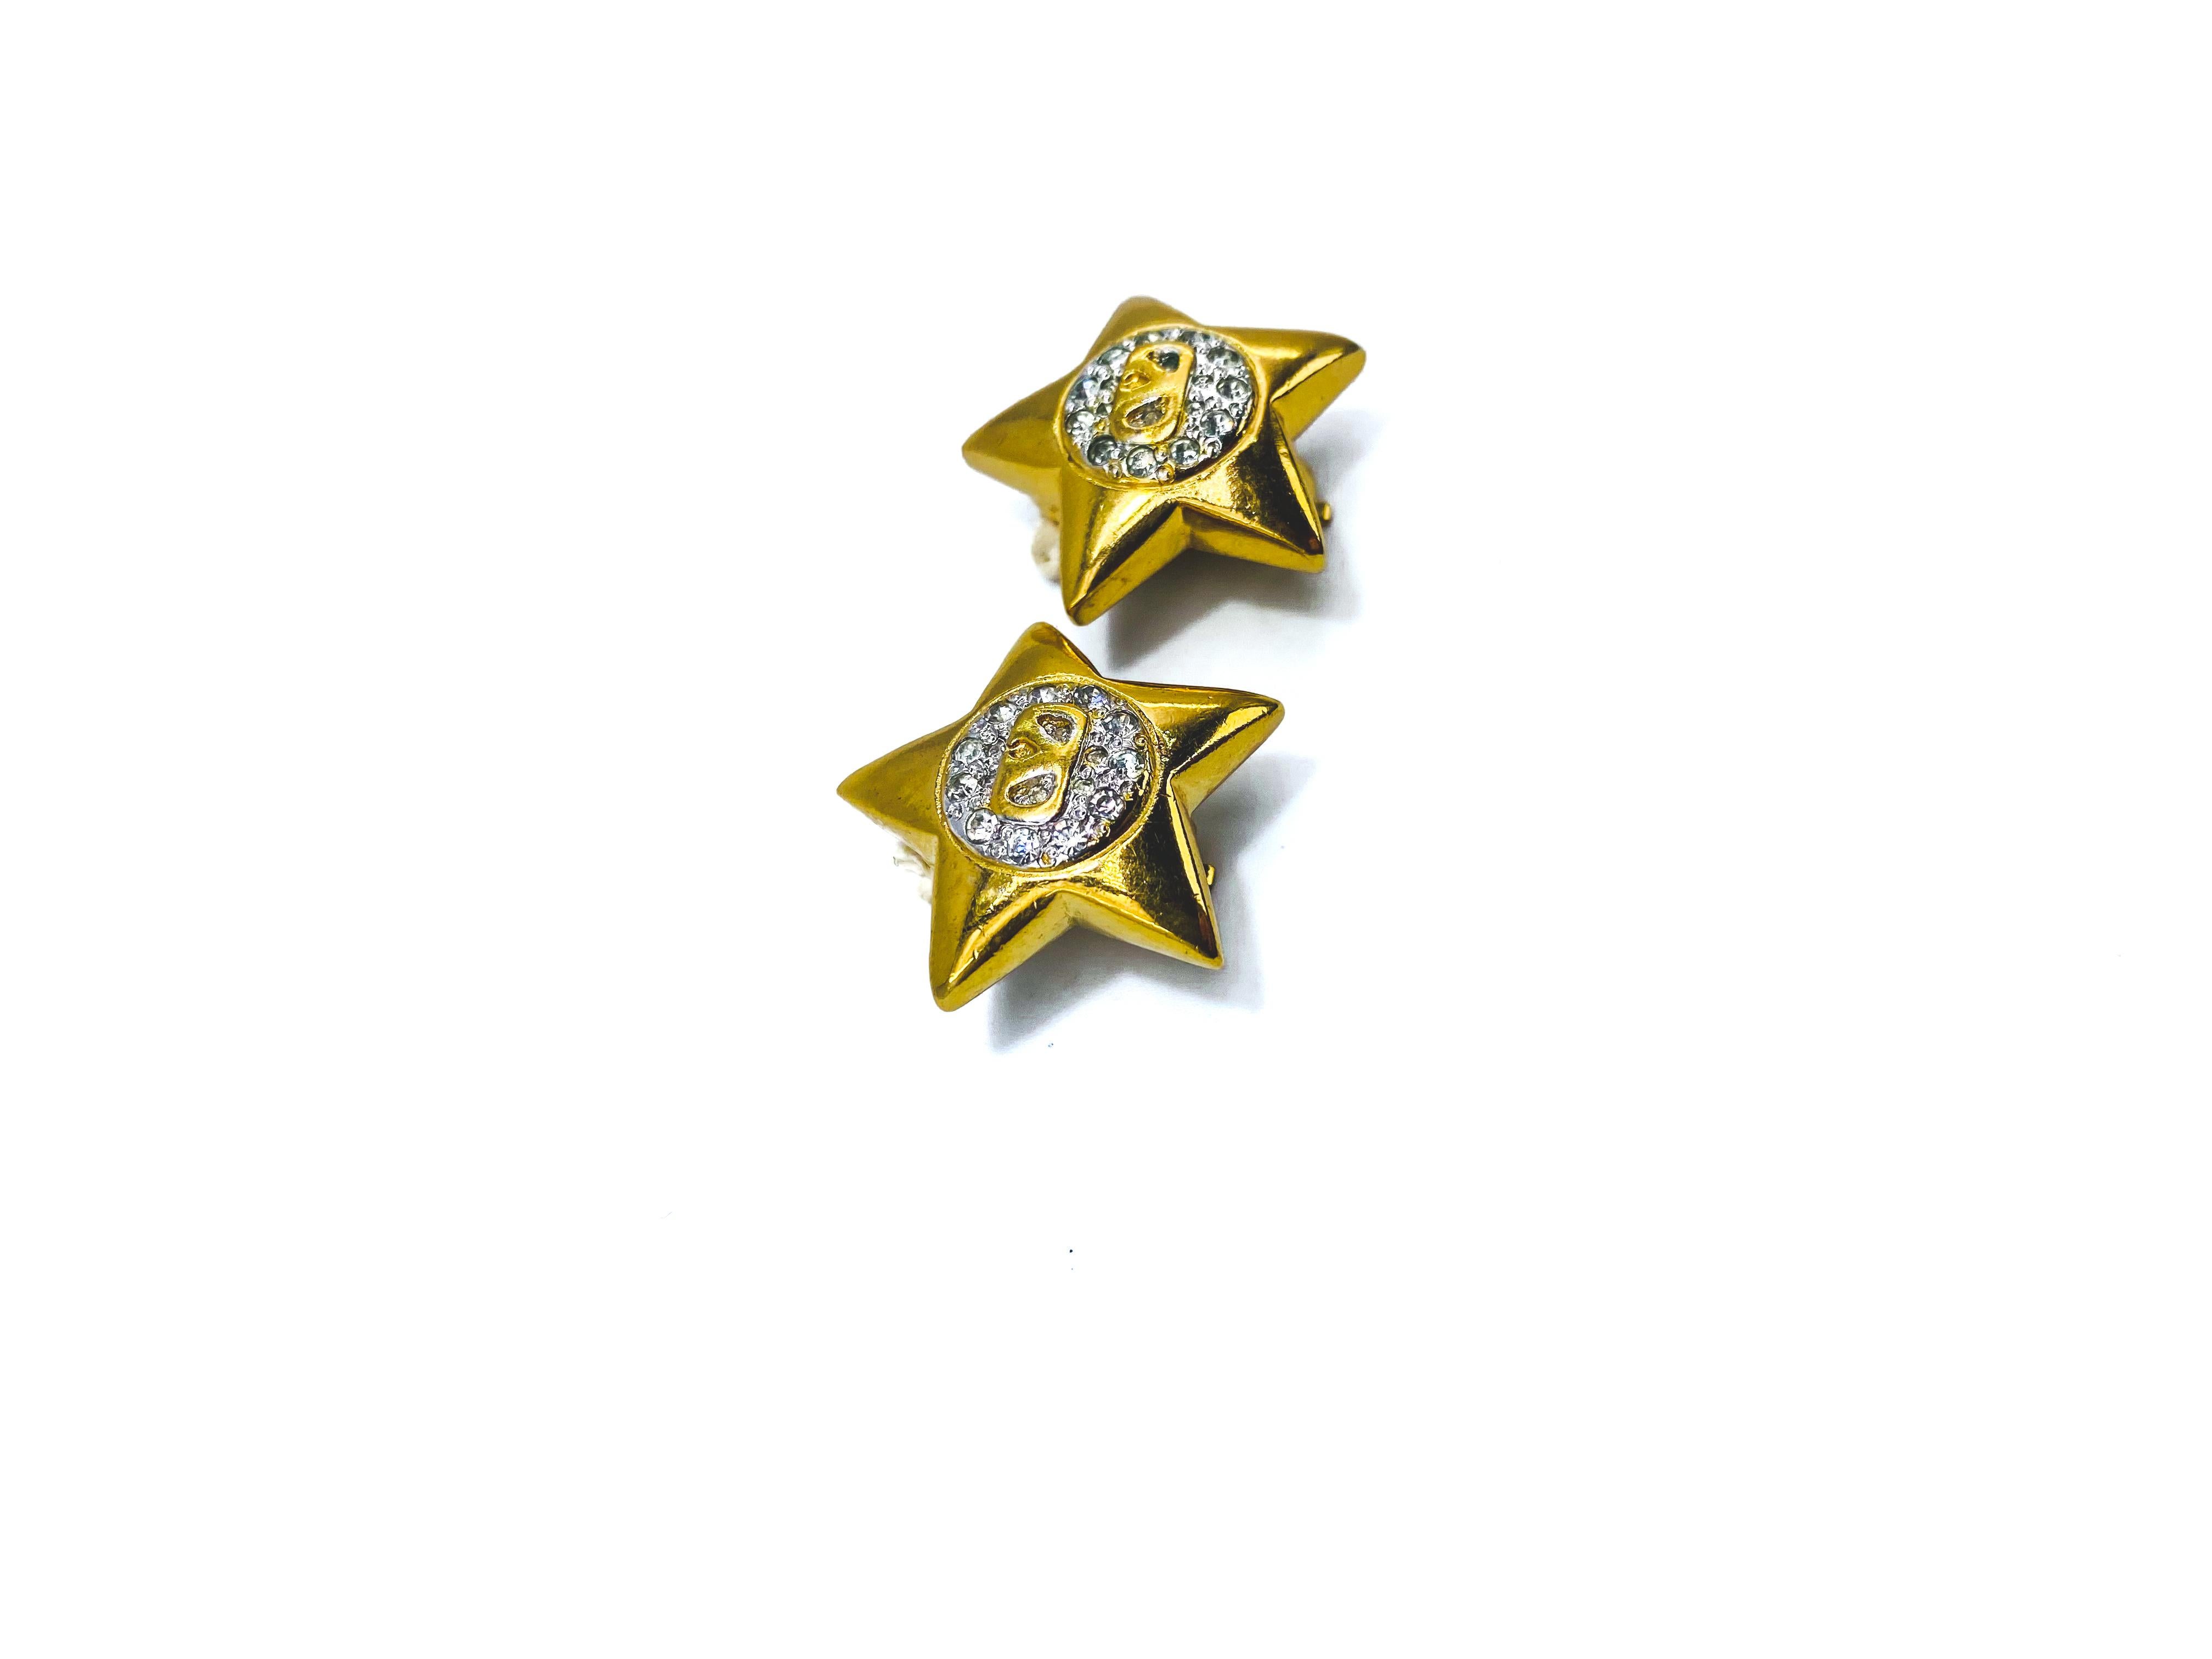 Valentino Vintage 1990s Star Earrings 

Super cool statement earrings from the iconic Valentino Garavani

Detail
-Made in Italy in the 1990s
-Crafted from gold plated metal and set with tiny rhinestones
-Feature the Valentino V at the centre

Size &